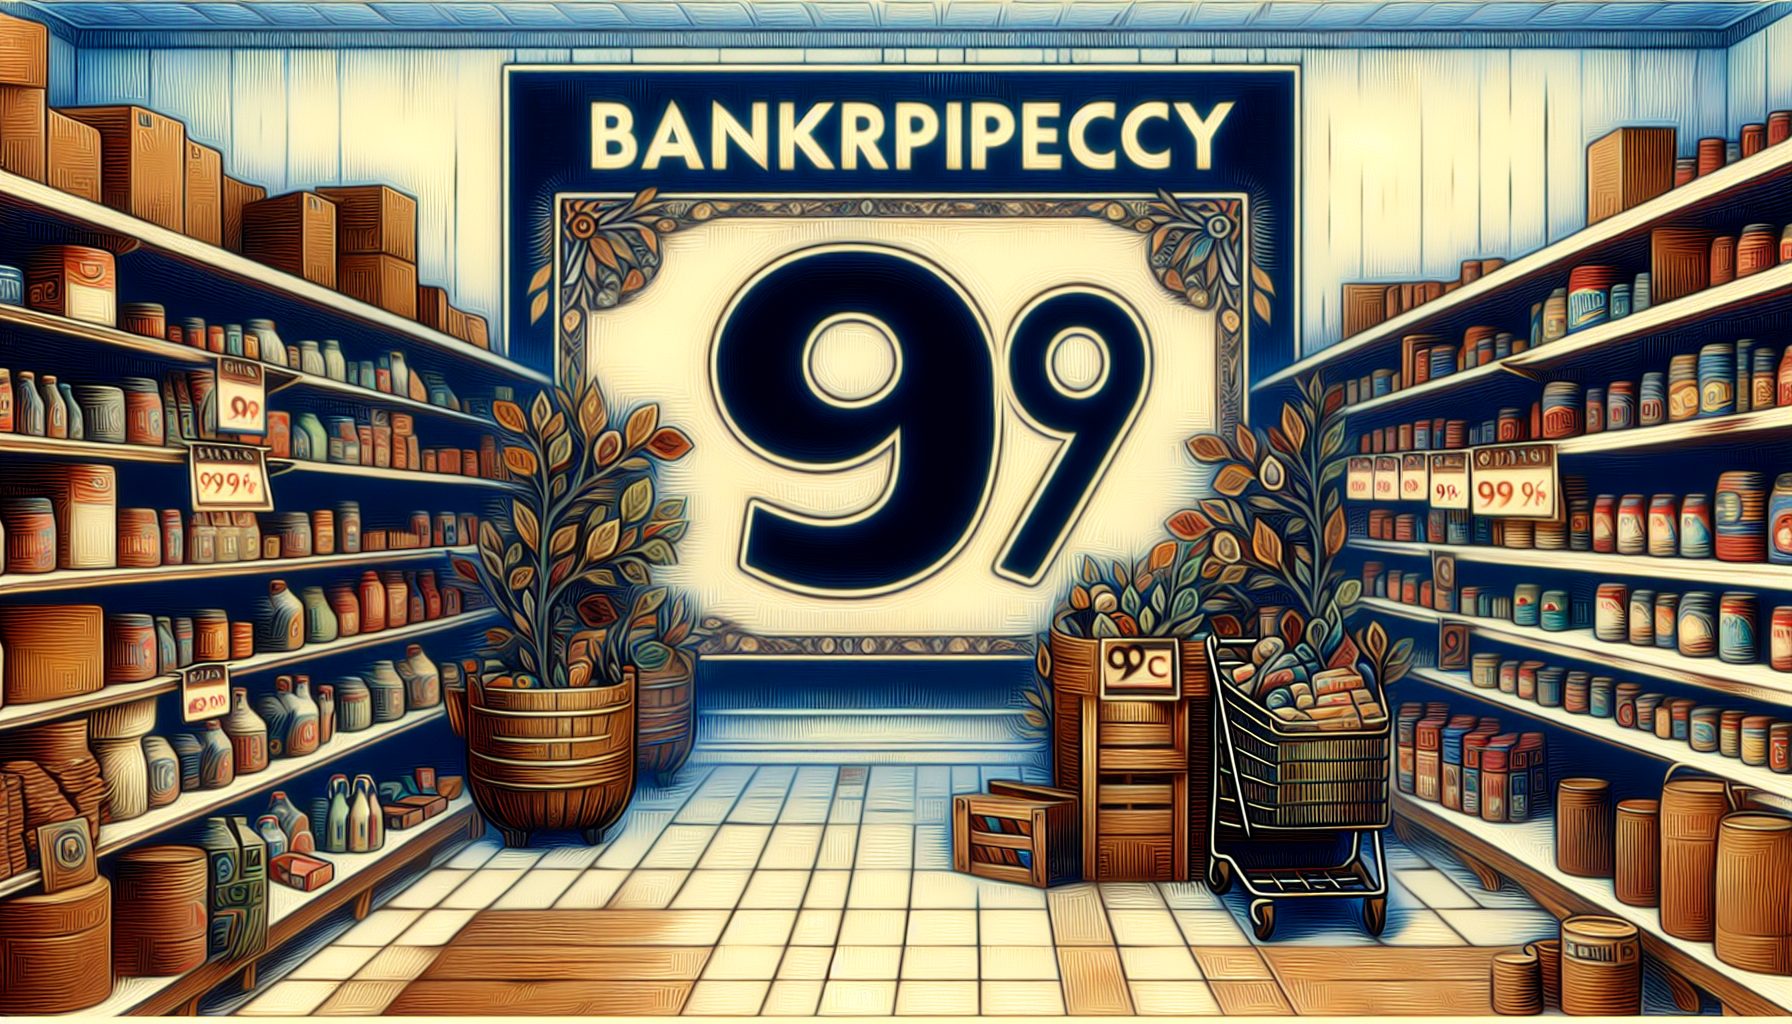 Bankruptcy Store Iconic